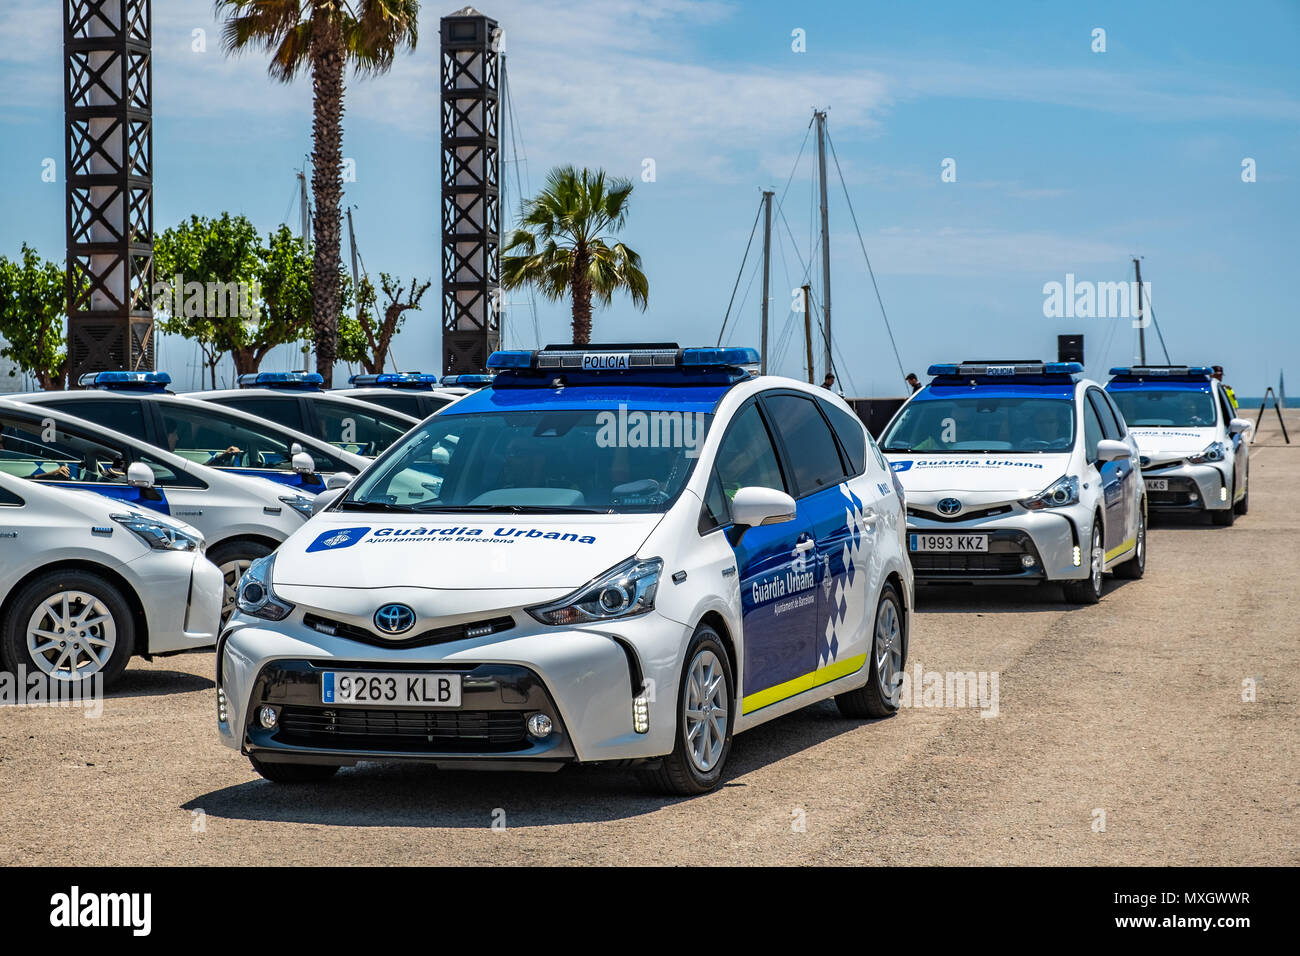 Barcelona, Spain. 4th June, 2018. New vehicles of the Urban Guard during the presentation. With the presence of Mayor Ada Colau and the security commissioner Amadeu Recasens, the presentation of the new patrol vehicle fleet of the Guardia Urbana de Barcelona Police  has taken place. The investment was 12.6 million euros. The new vehicles with a hybrid system allow a fuel saving of 608 euros per vehicle per year. These new cars are equipped with new communication technology and cameras with license plate recognition. Stock Photo